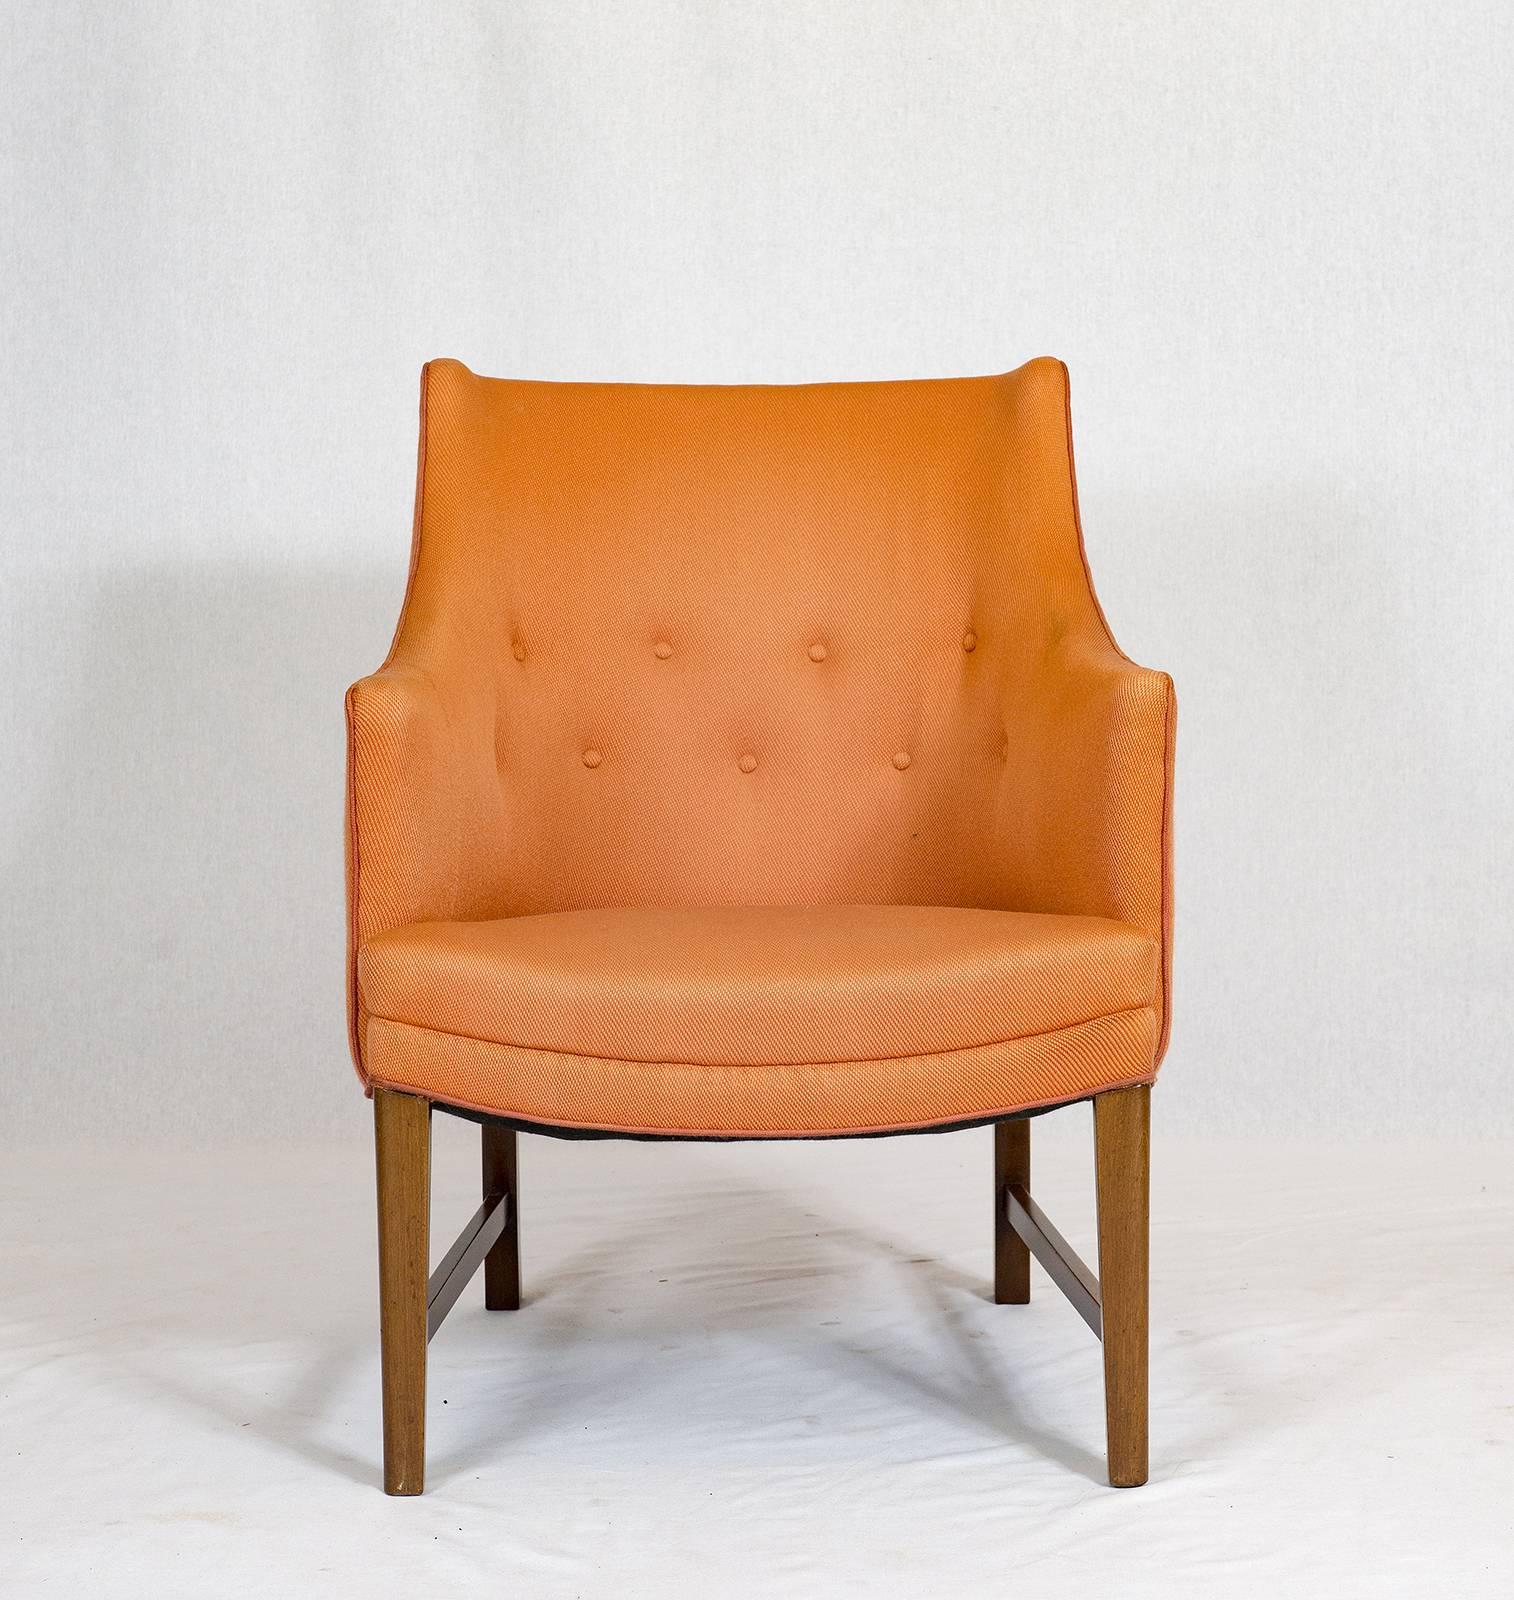 Frits Henningsen lounge chair from the 1940s.    Store formerly known as ARTFUL DODGER INC